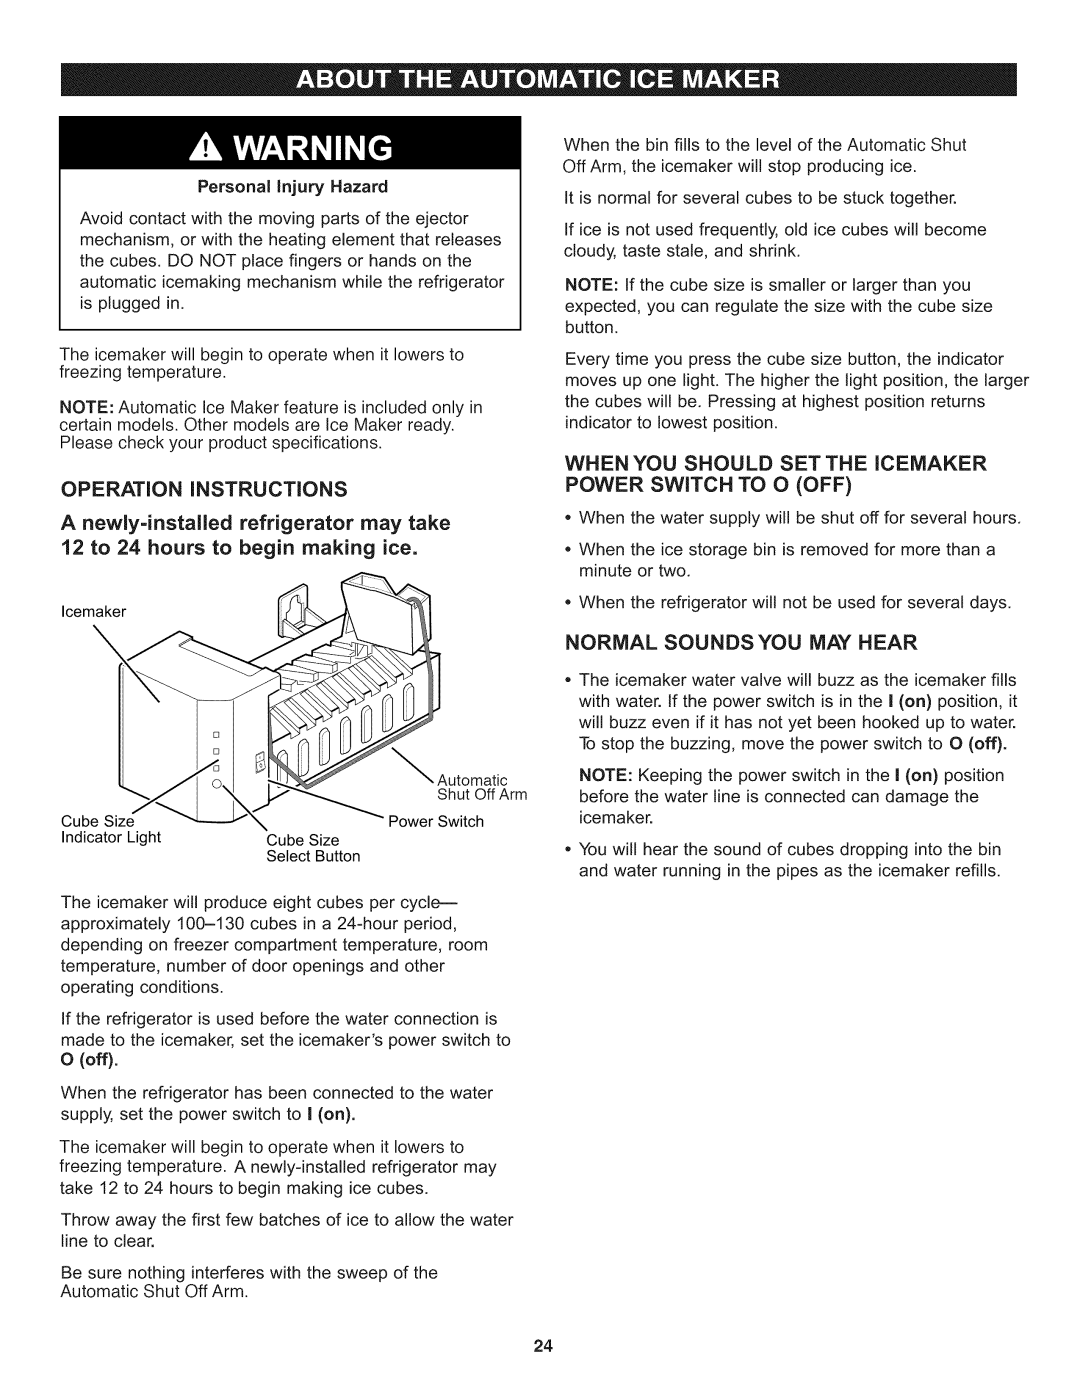 Kenmore 795.6991, 795.6397 manual OPERATION iNSTRUCTIONS, When You Should Set The Icemaker, Normal Sounds You May Hear, Ooff 